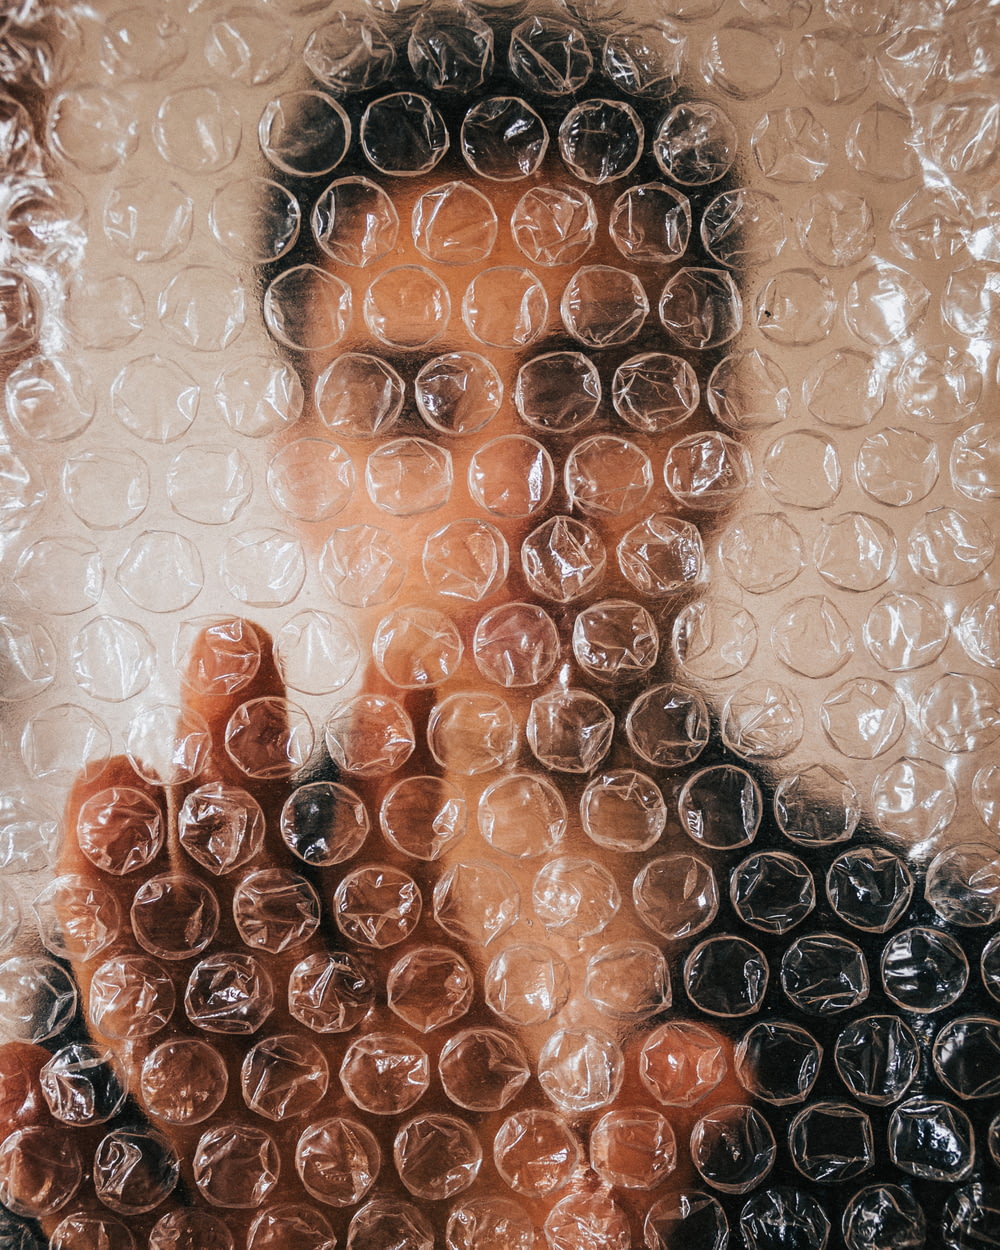 a close up of a person's face behind a bubble wrap